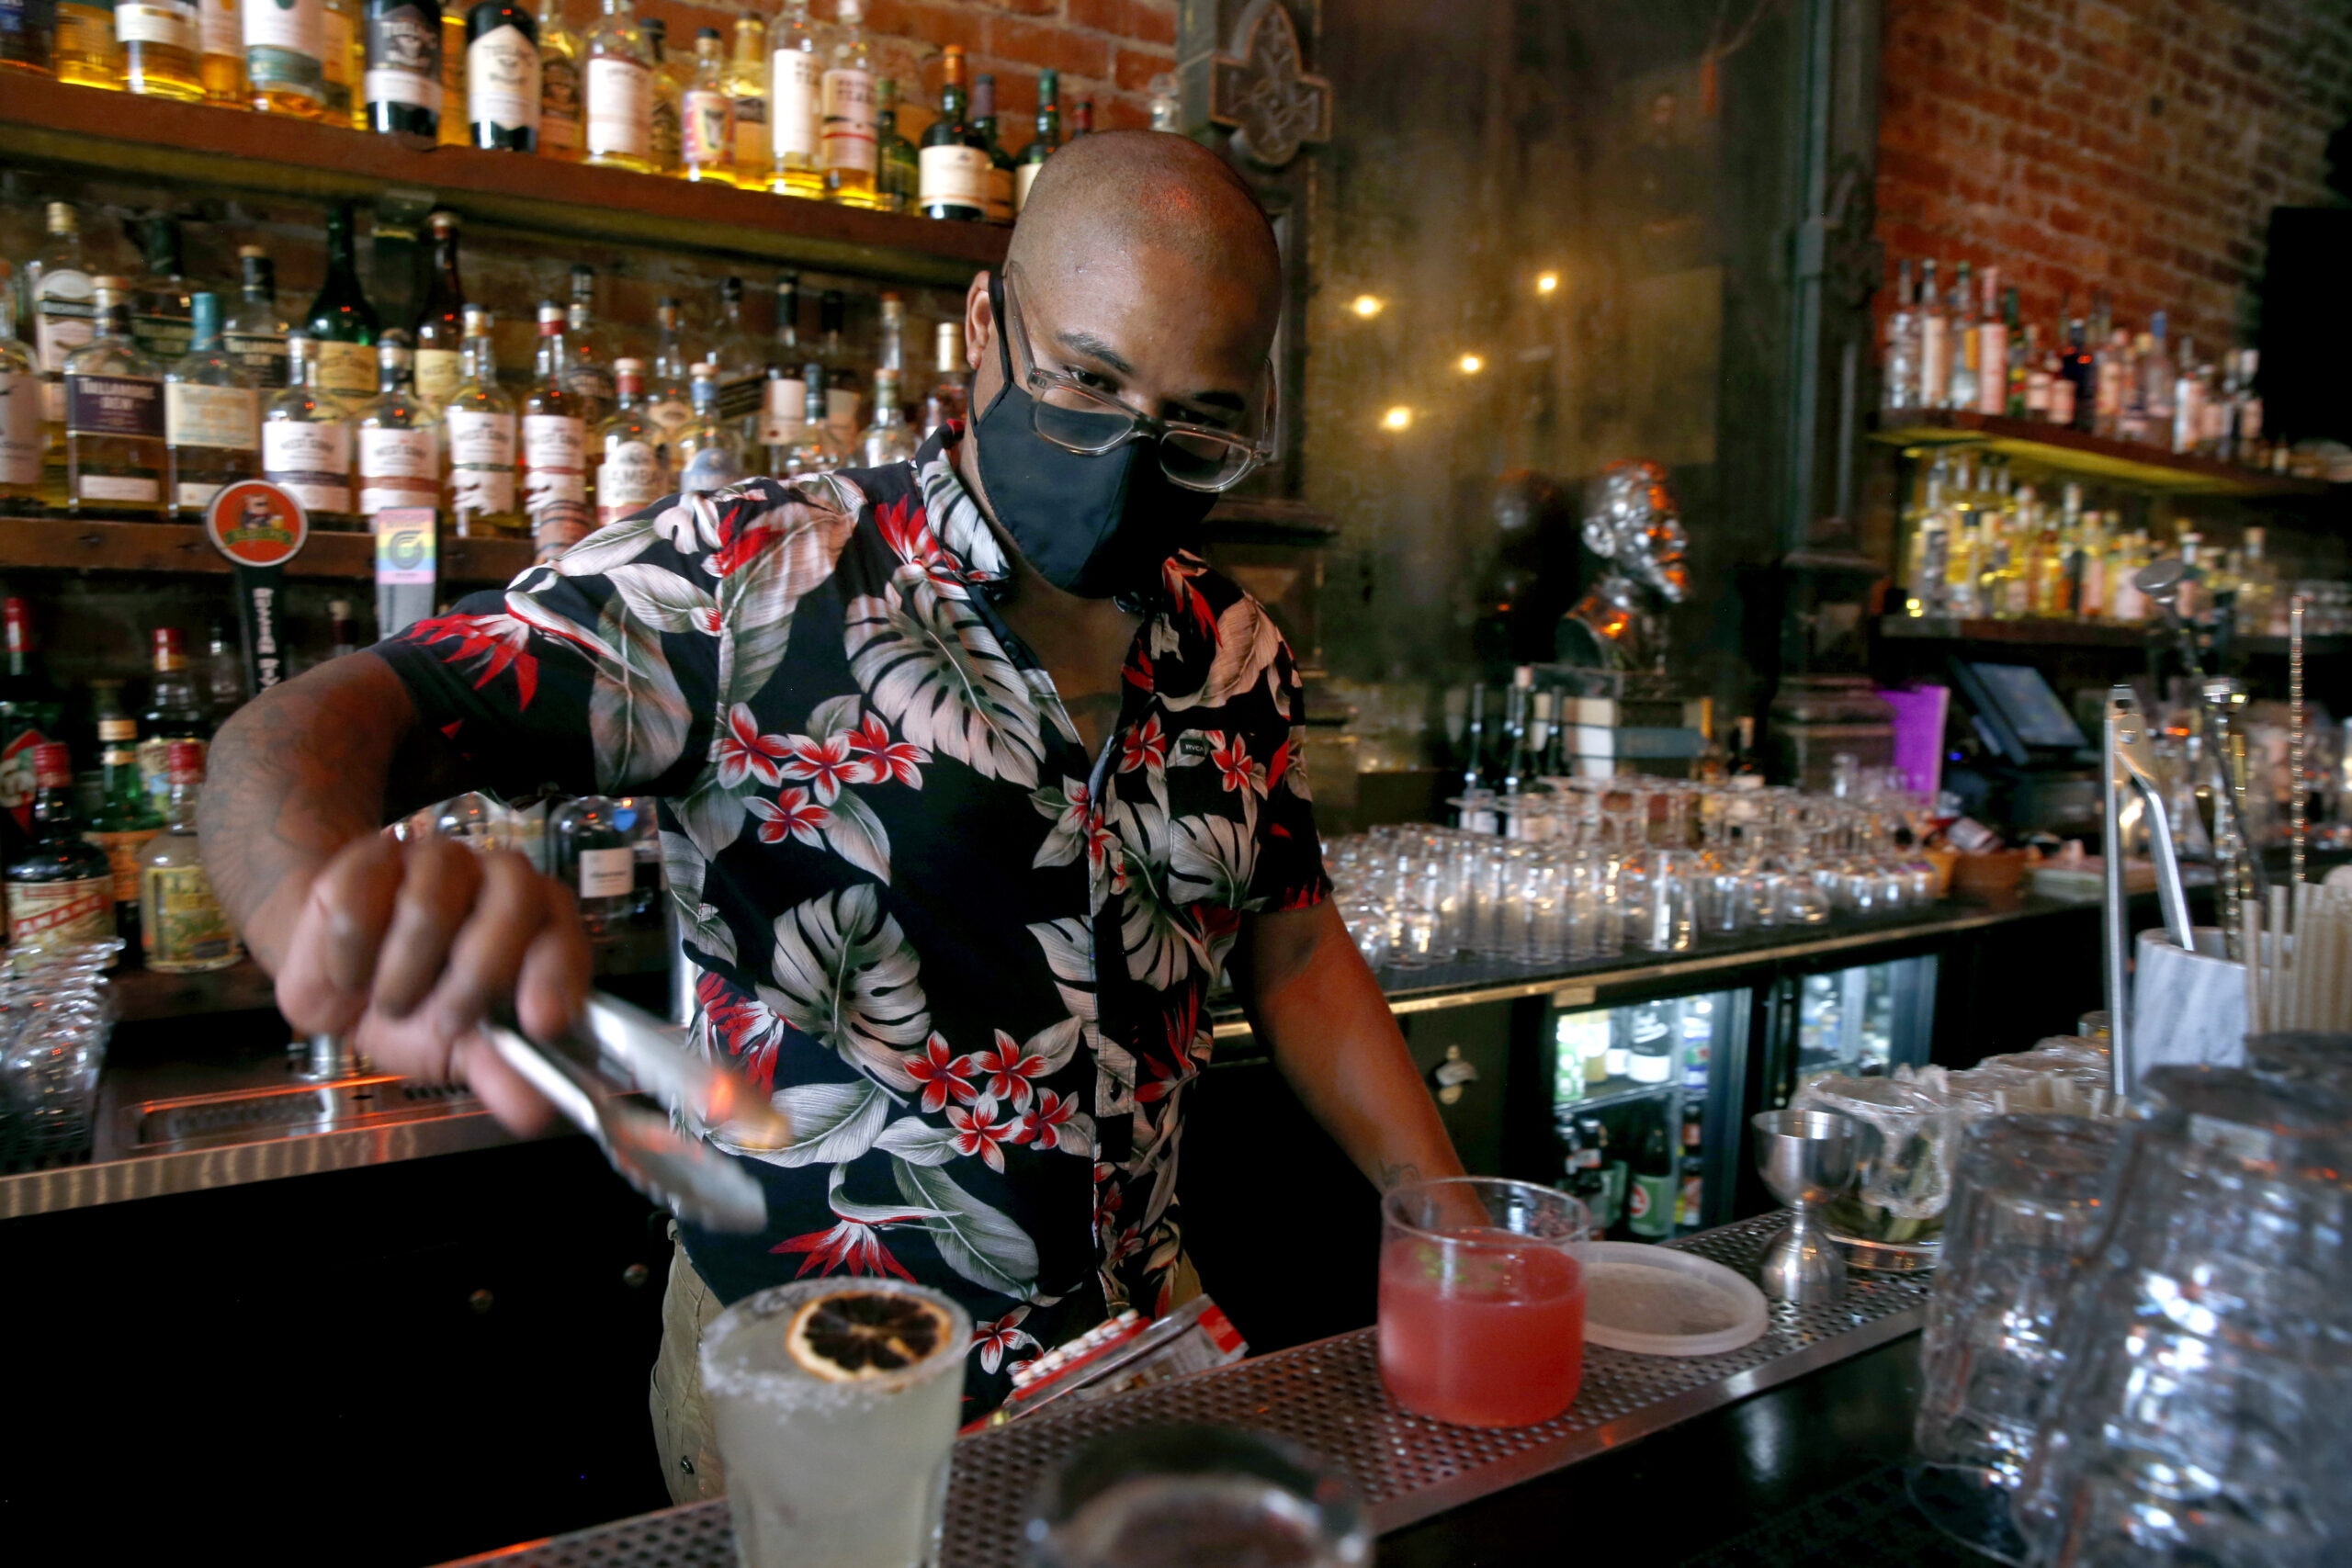 Nightlife Pros Agree: Tipping $1 for a Cocktail Makes You a Cheapskate